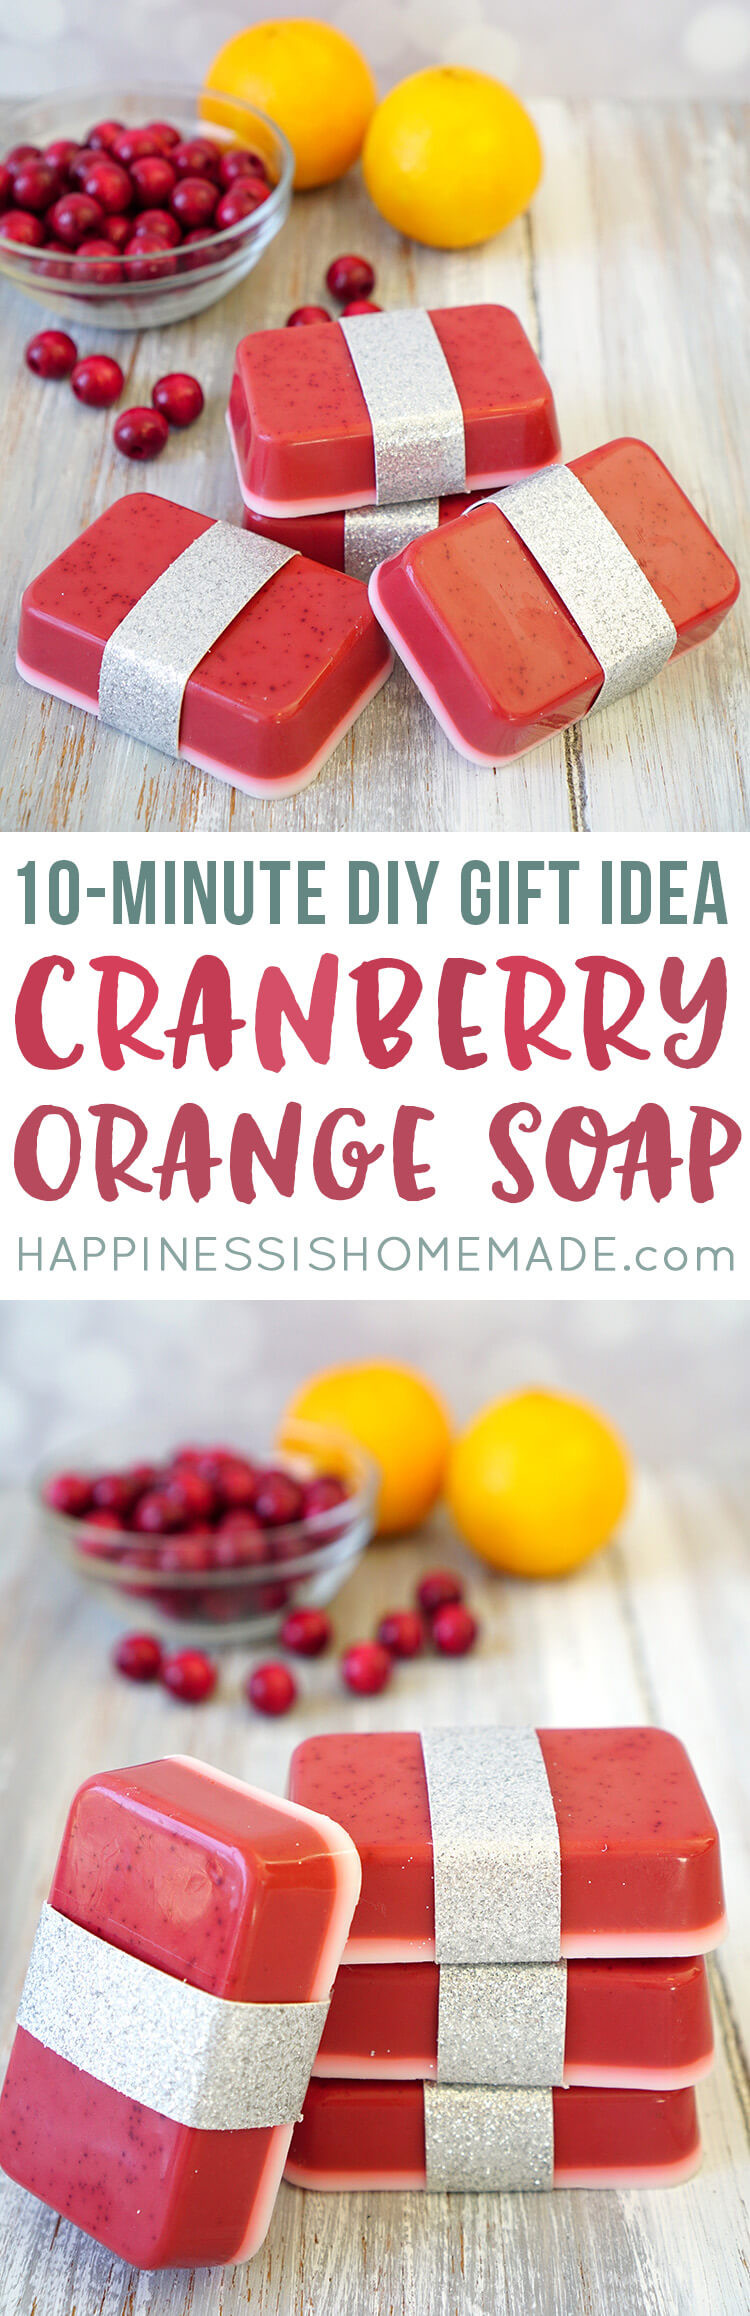 DIY Christmas Presents For Friends
 10 Minute DIY Cranberry Orange Soap Happiness is Homemade